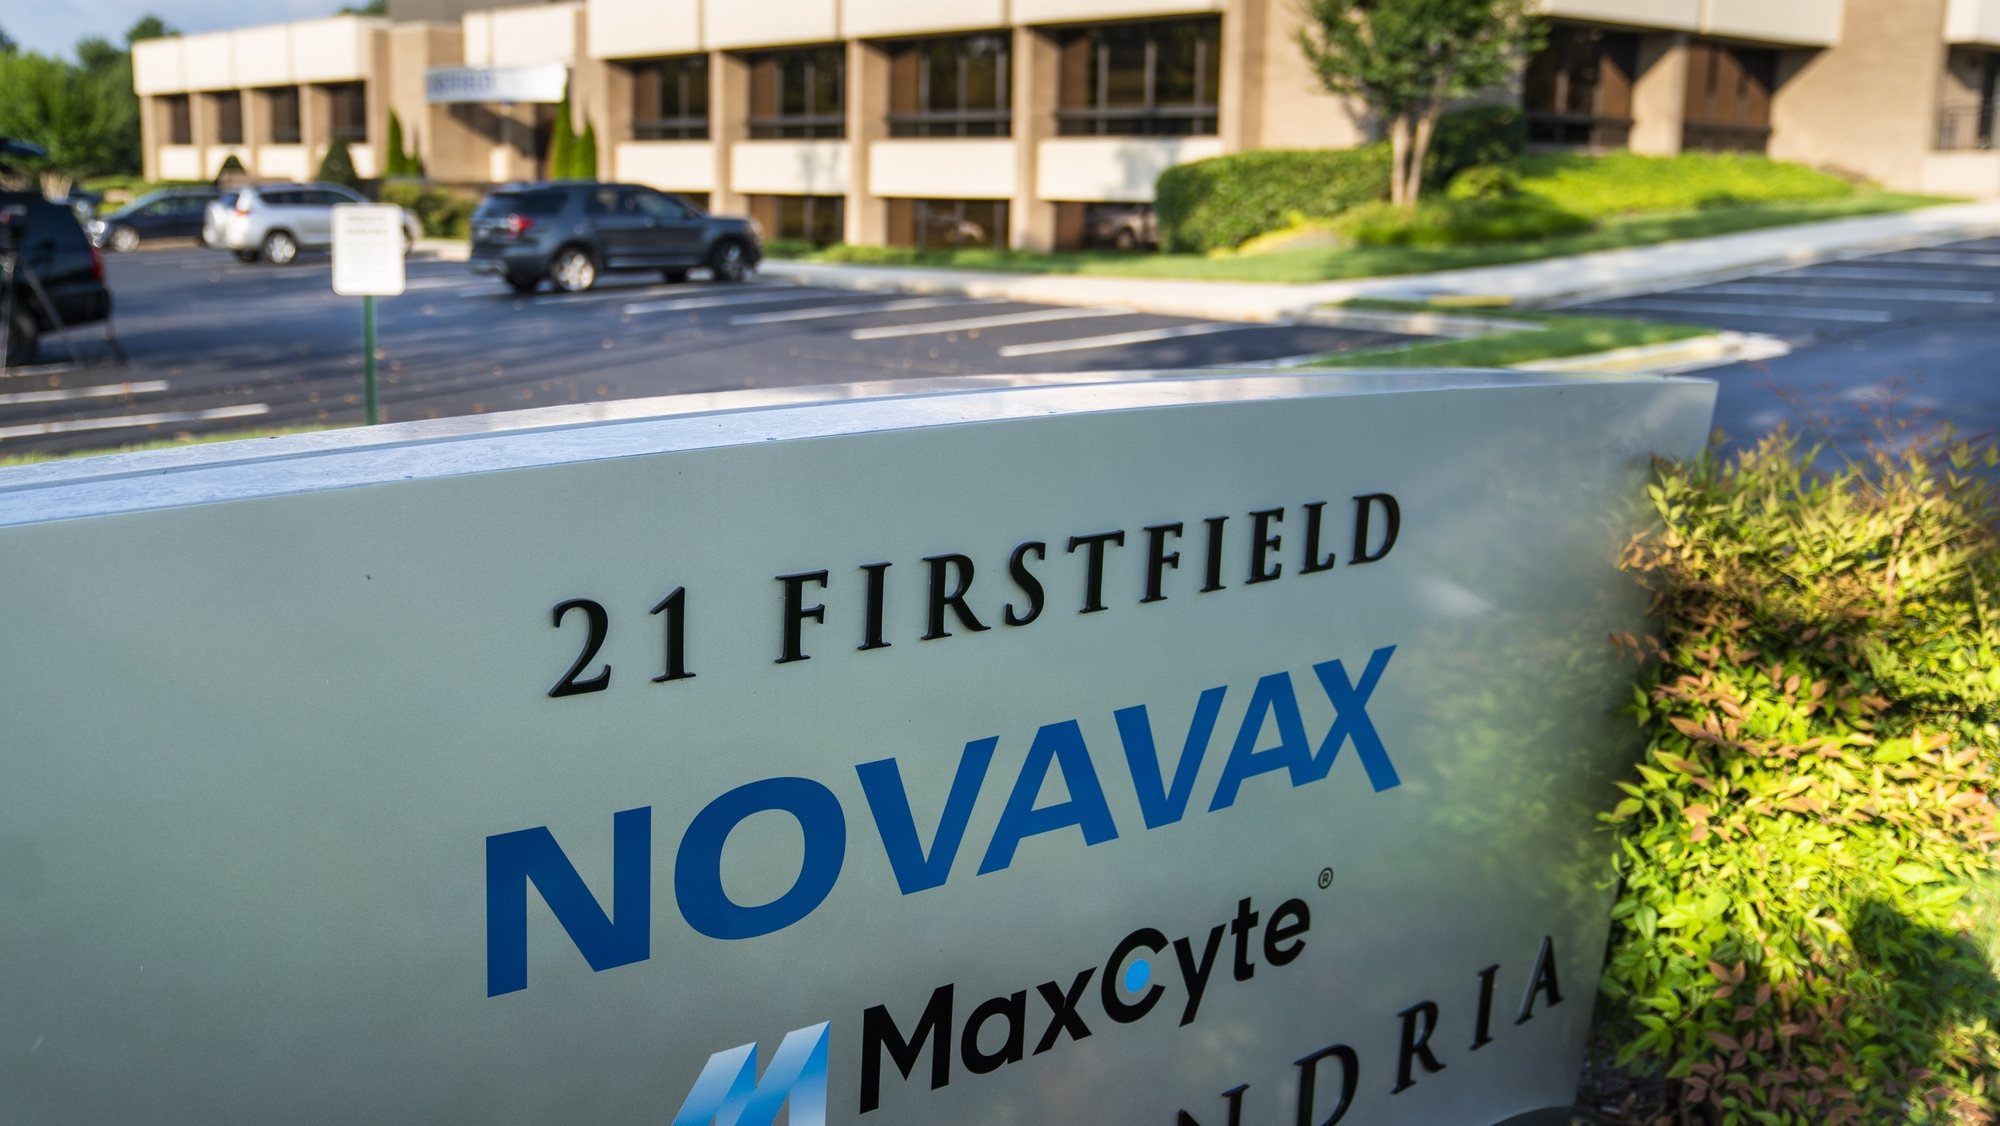 epa08534367 Novavax Inc. headquarters in Gaithersburg, Maryland, USA, 08 July 2020. The company received a 1.6 billion US dollar award from the US government to further develop its experimental COVID-19 vaccine.  EPA/JIM LO SCALZO